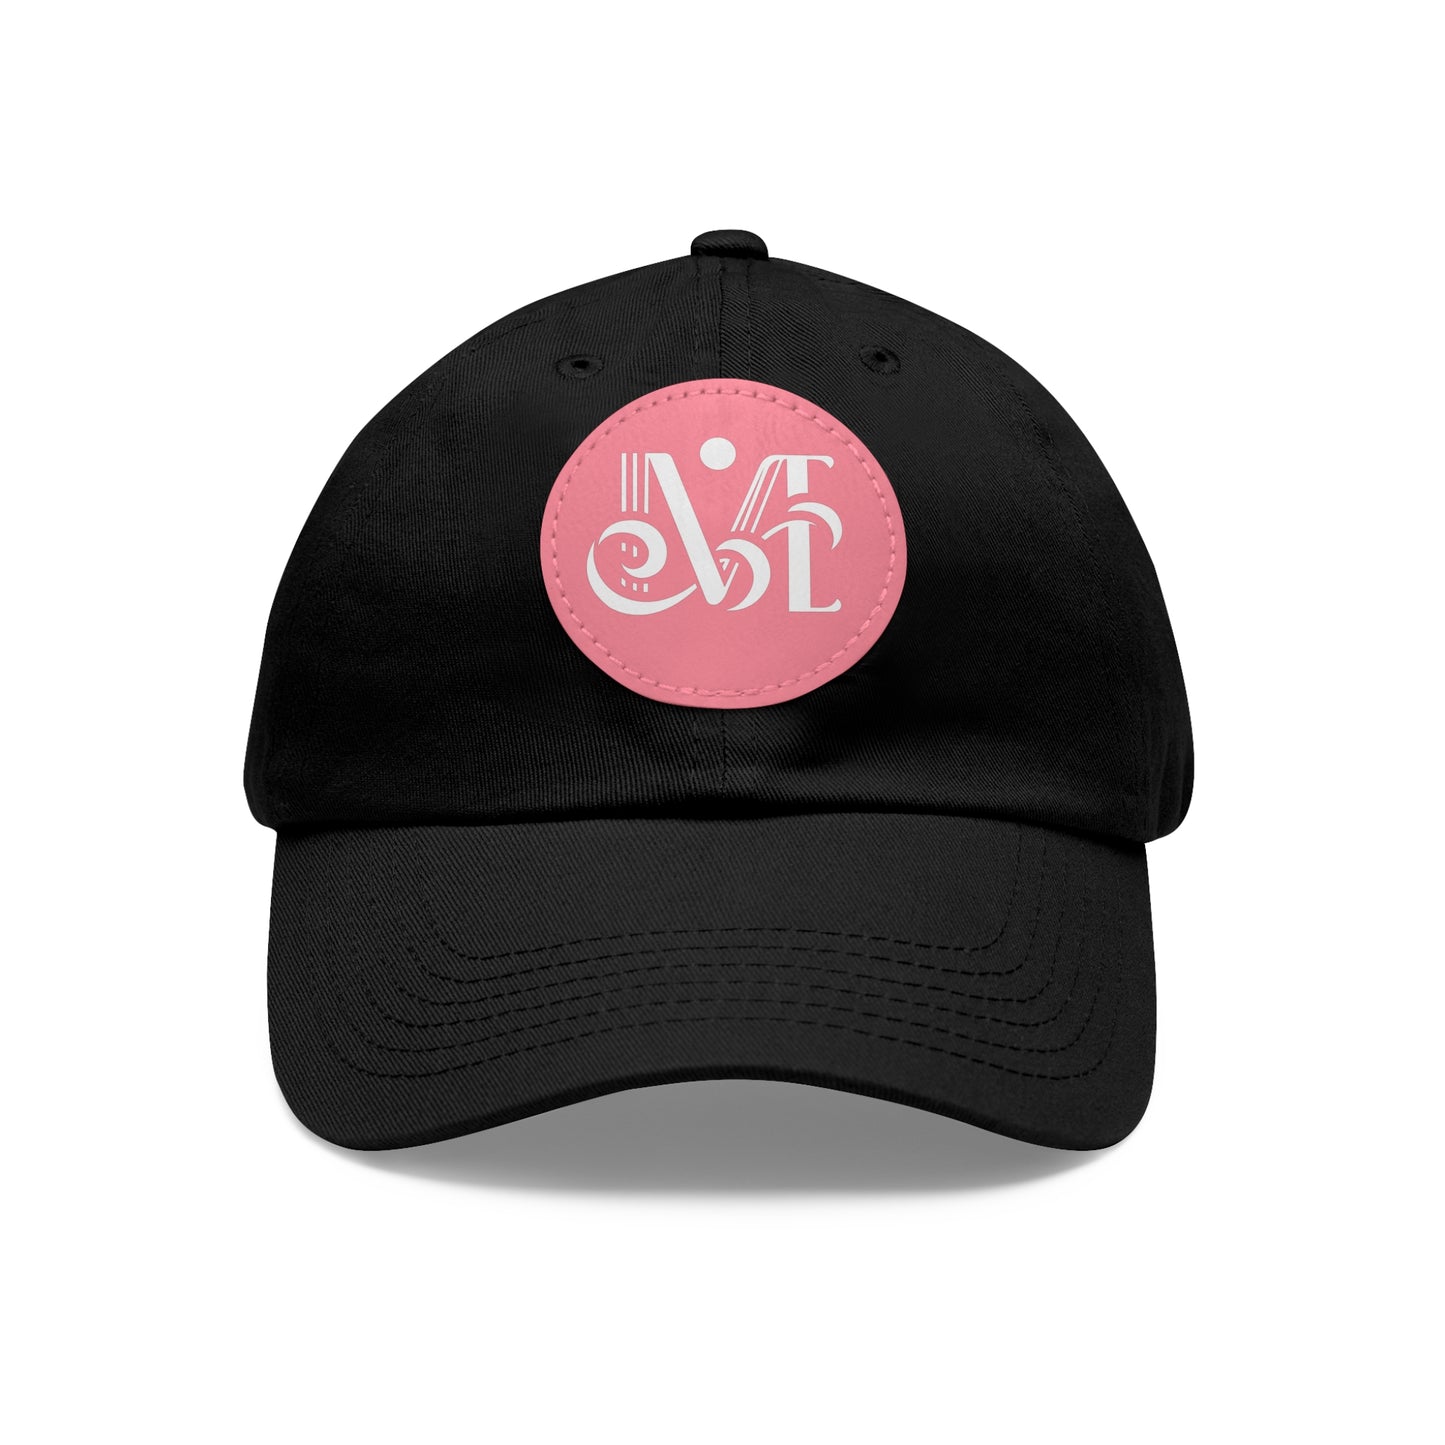 I AM ME - Authentic Self - Leather Patch Hat